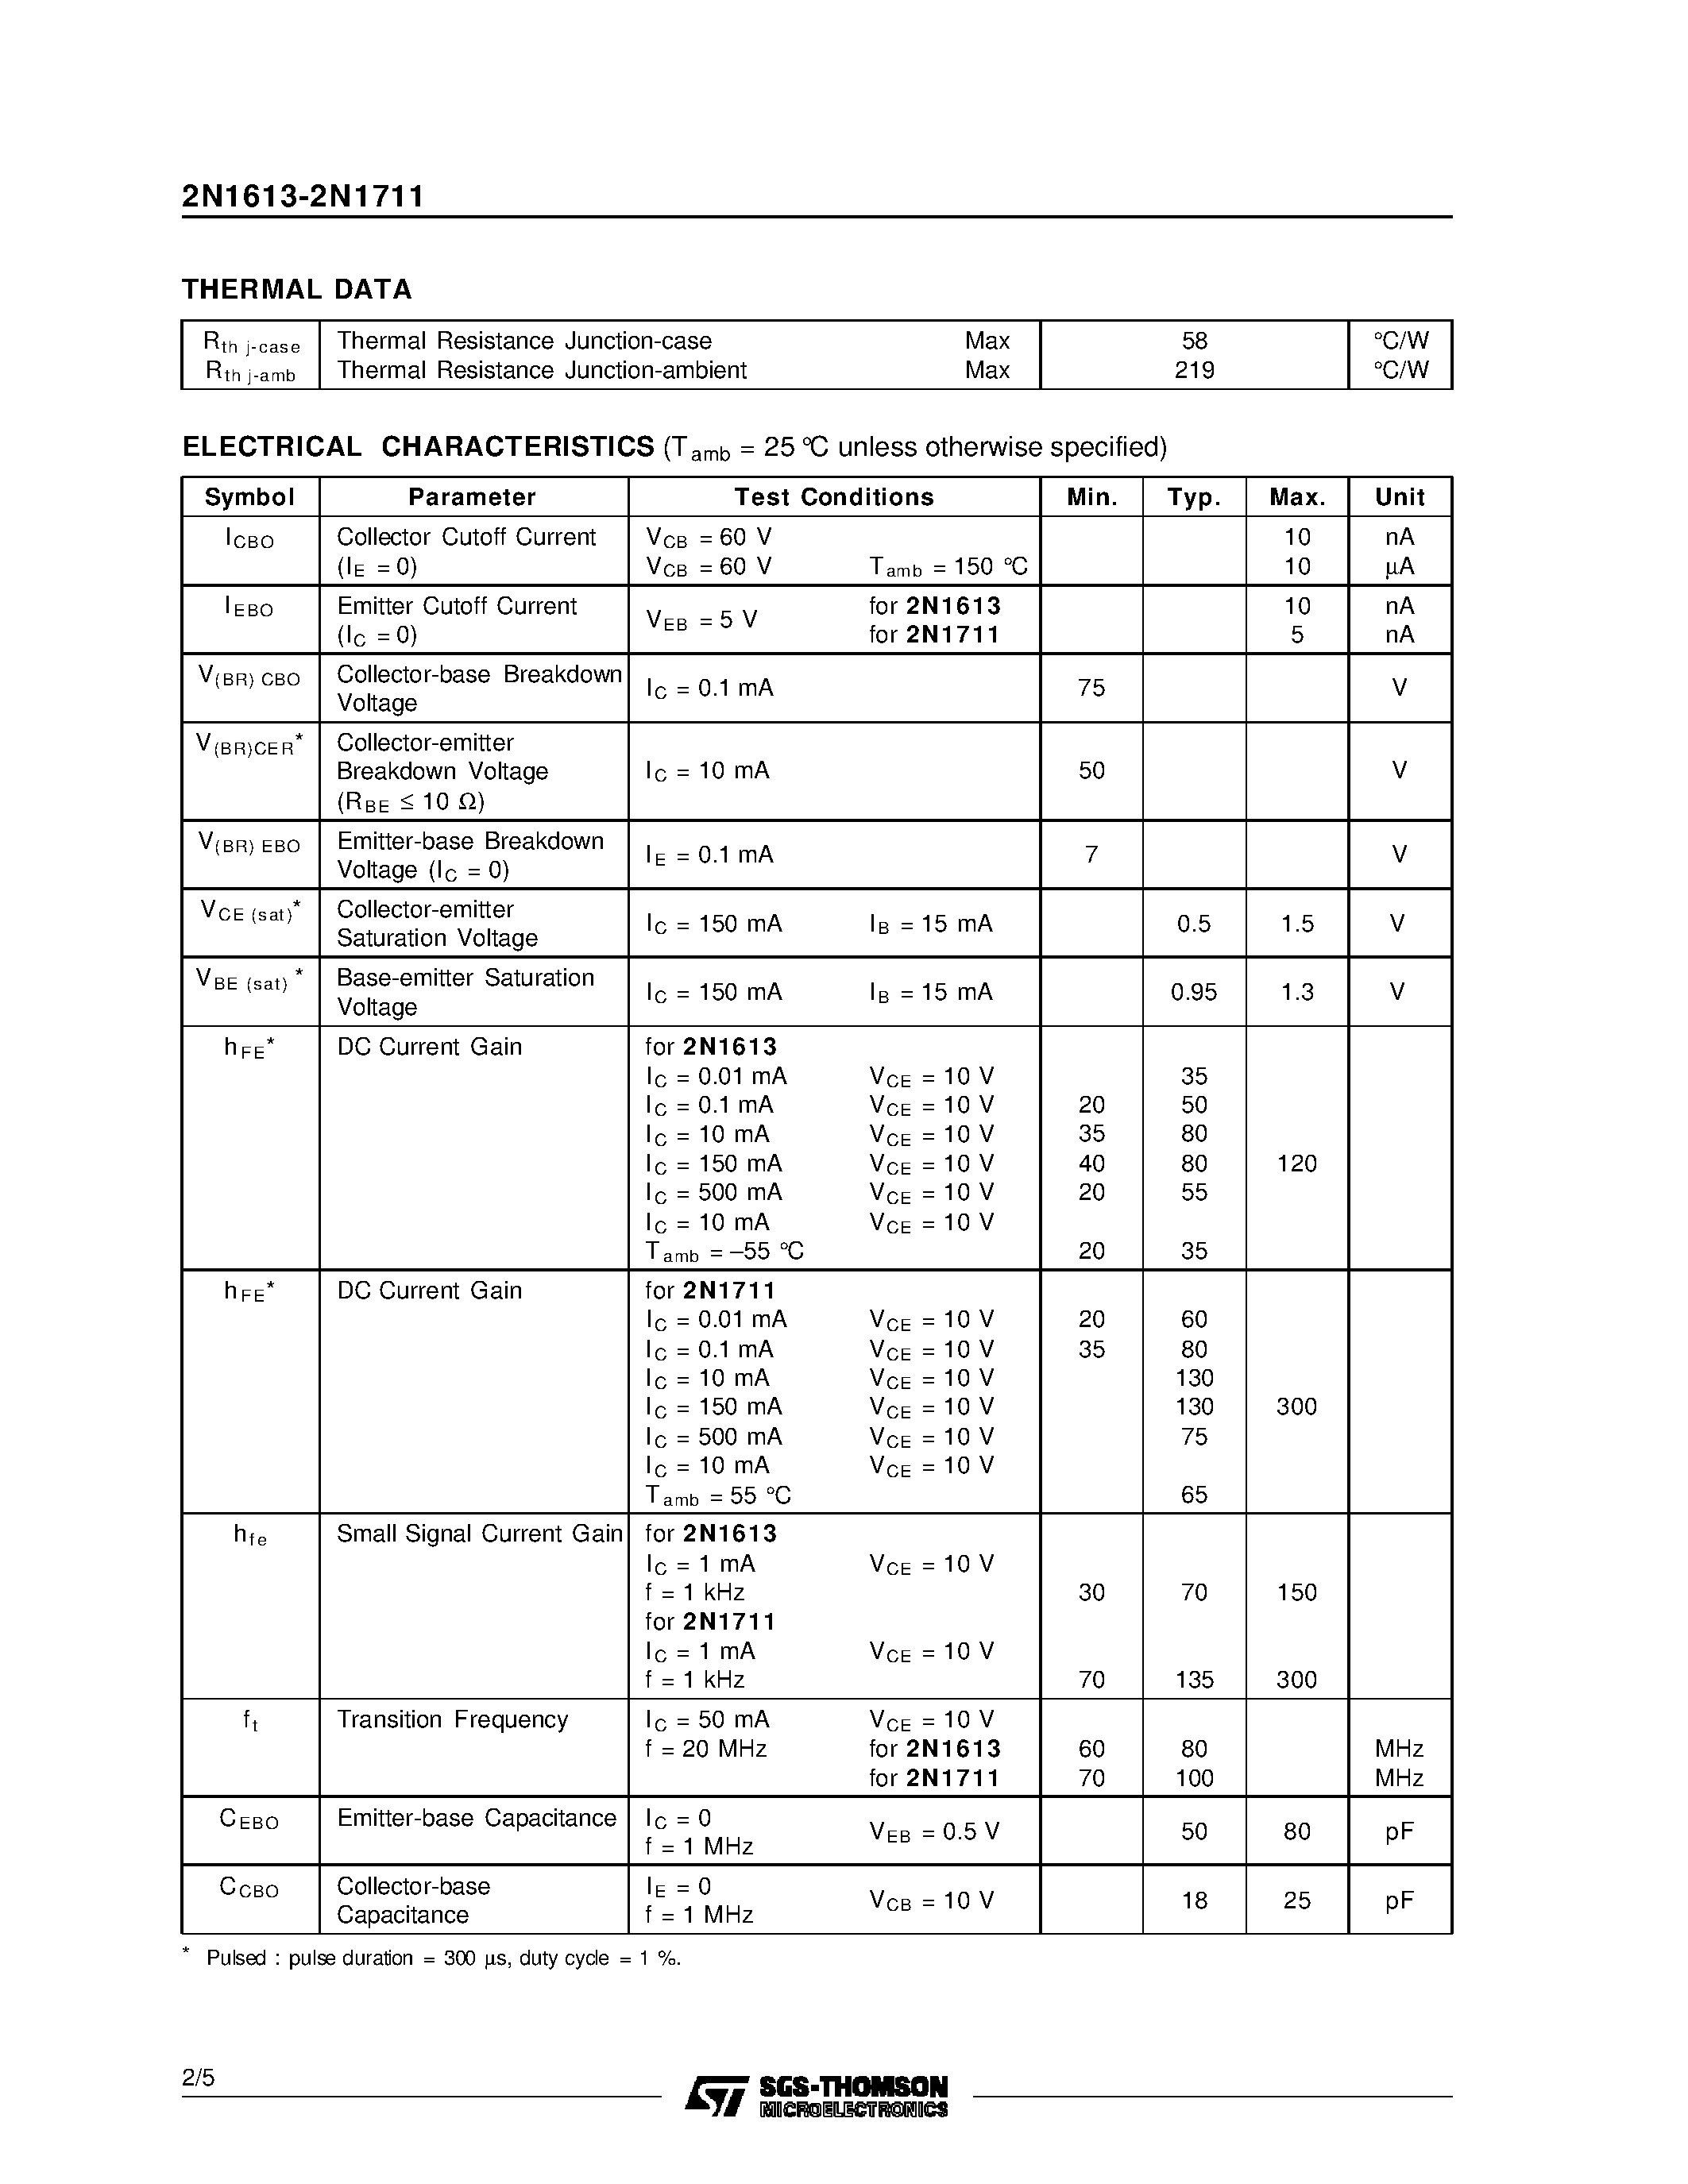 Datasheet 2N1711 - SWITCHES AND UNIVERSAL AMPLIFIERS page 2